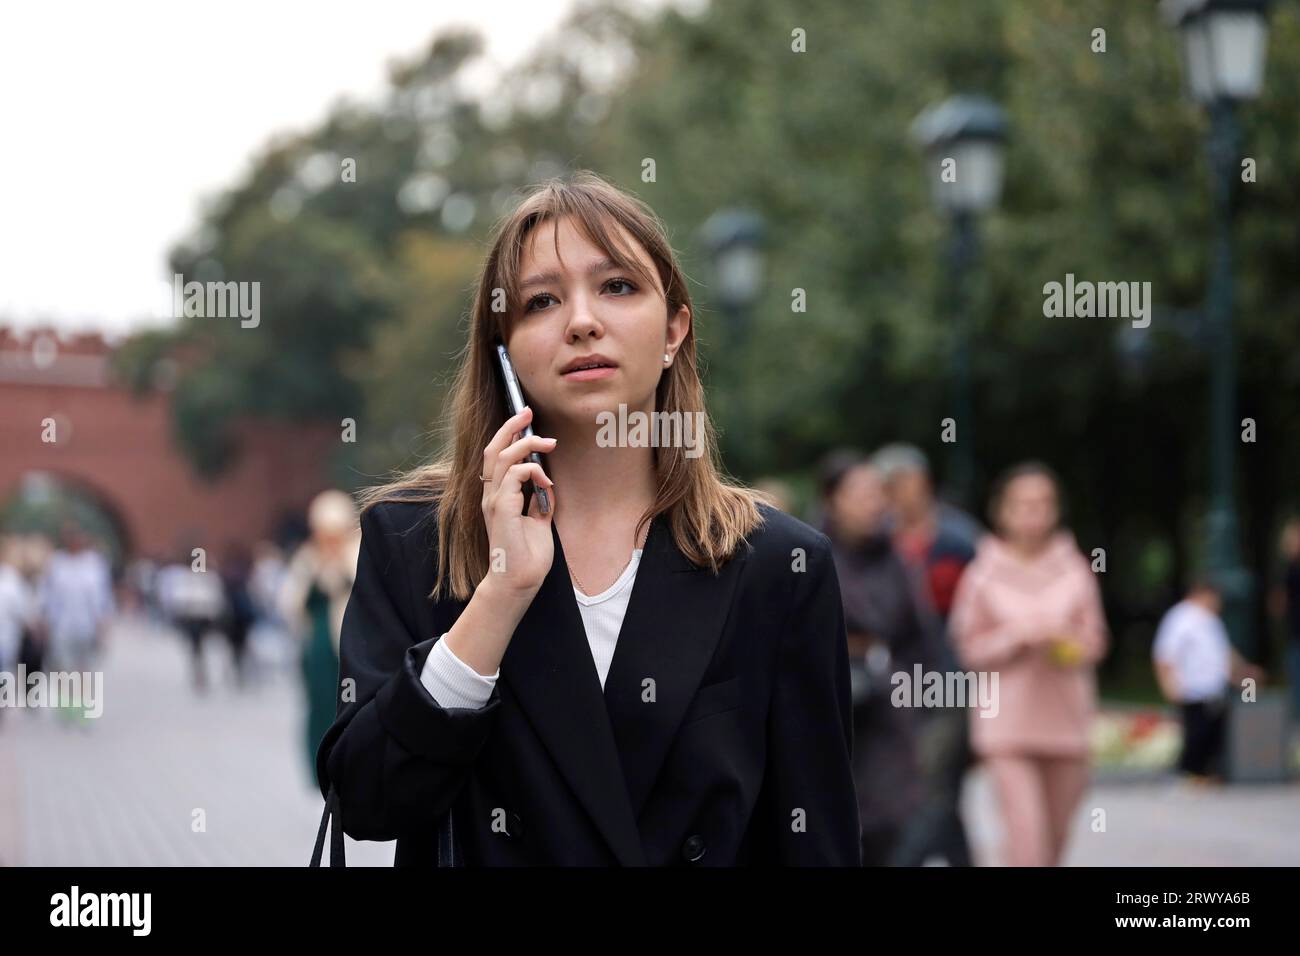 Girl talking on mobile phone while walking on city street Stock Photo